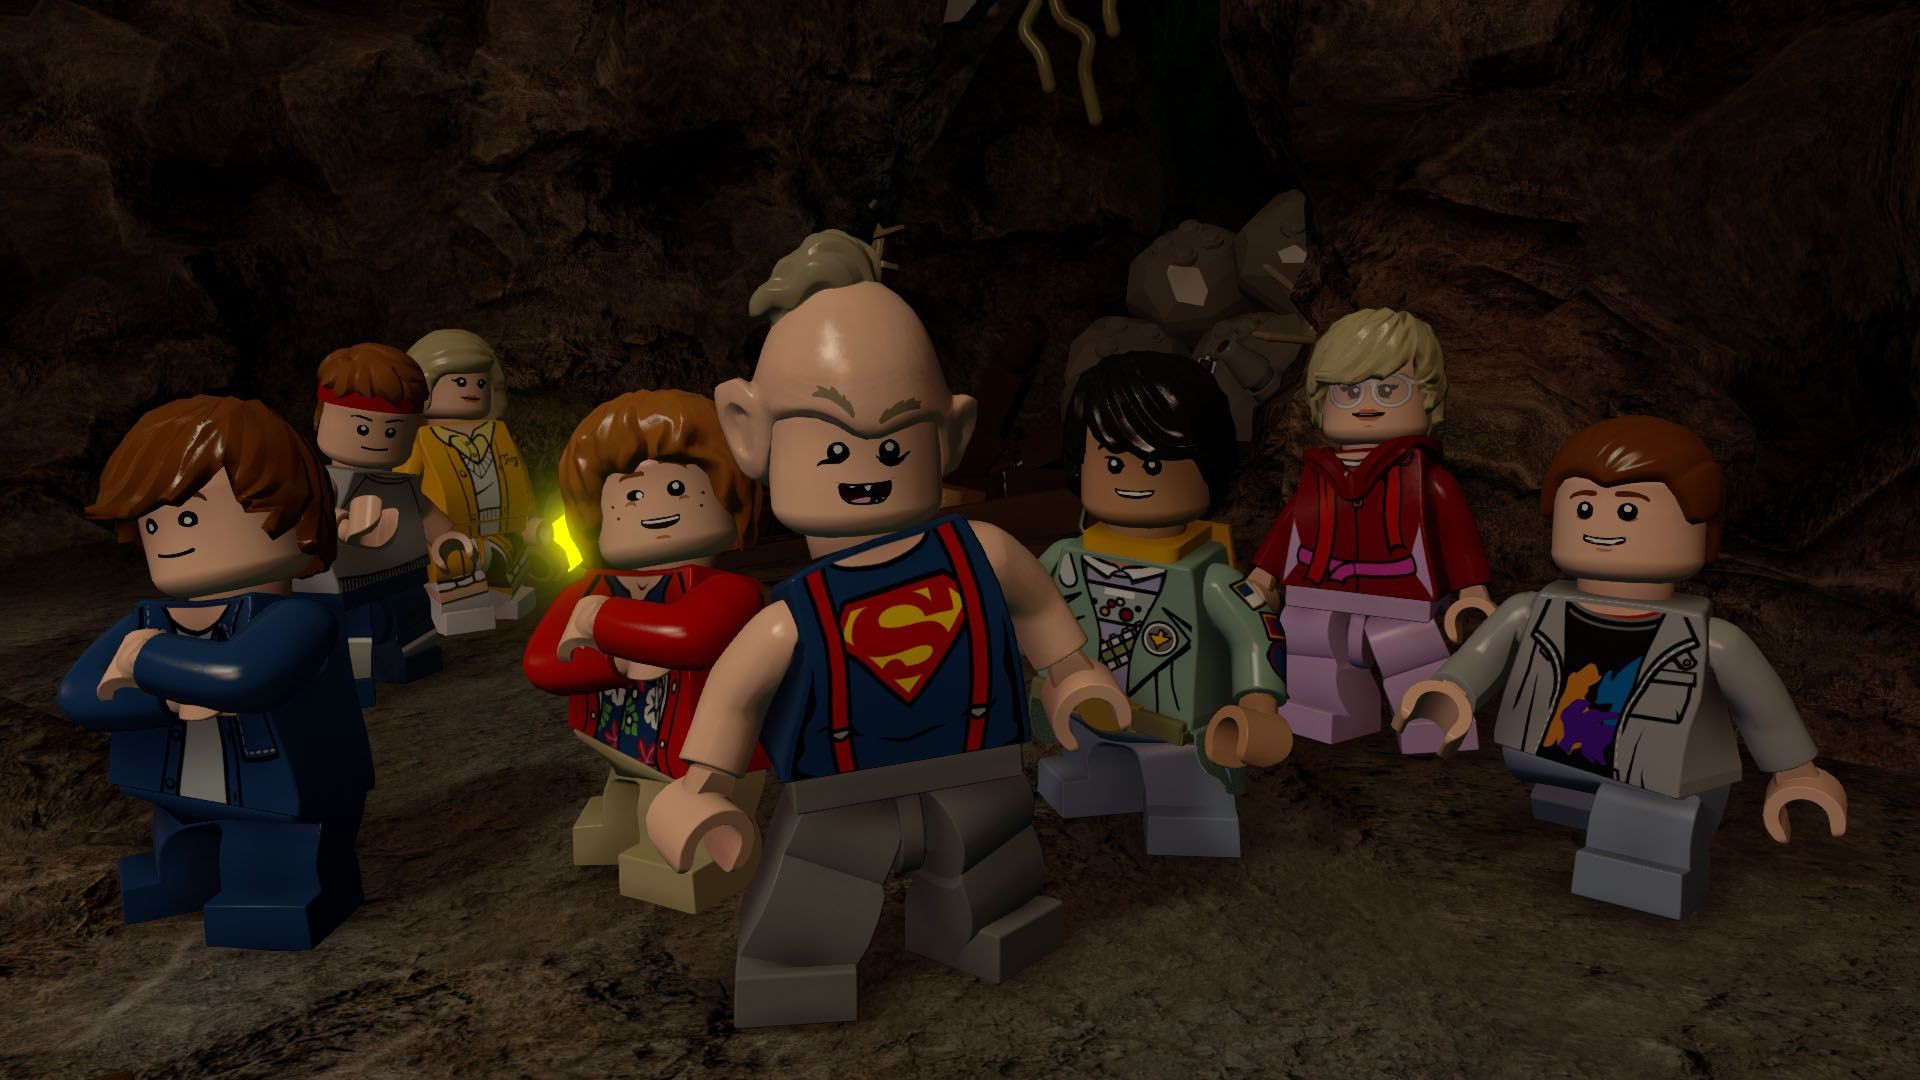 1920x1080 Game review: Lego The Goonies is an 80s-tastic tie-in